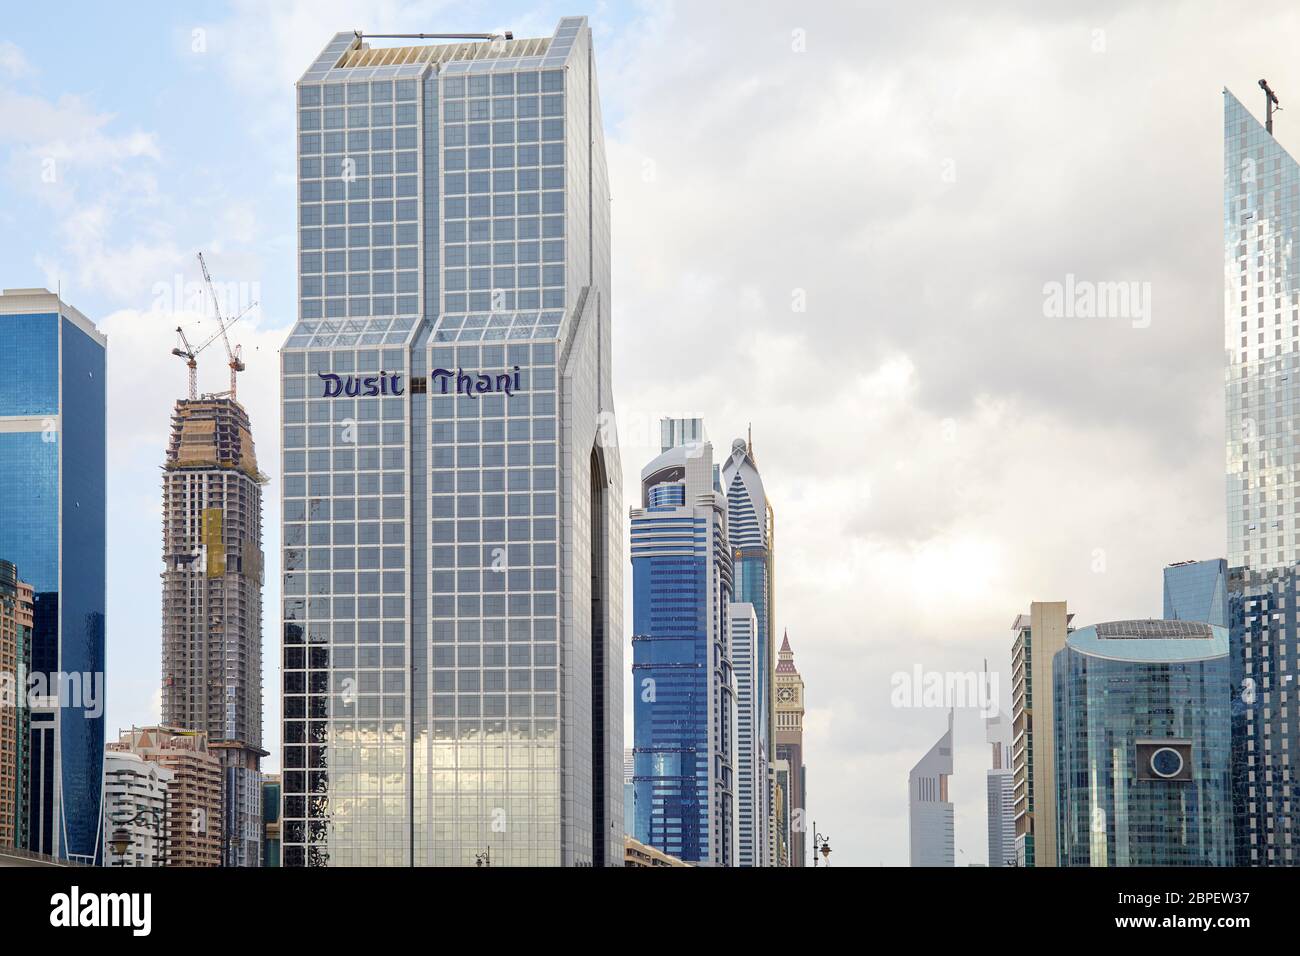 DUBAI, UNITED ARAB EMIRATES - NOVEMBER 21, 2019: Dusit Thani hotel and Sheikh Zayed Road view with modern skyscrapers in a cloudy day Stock Photo